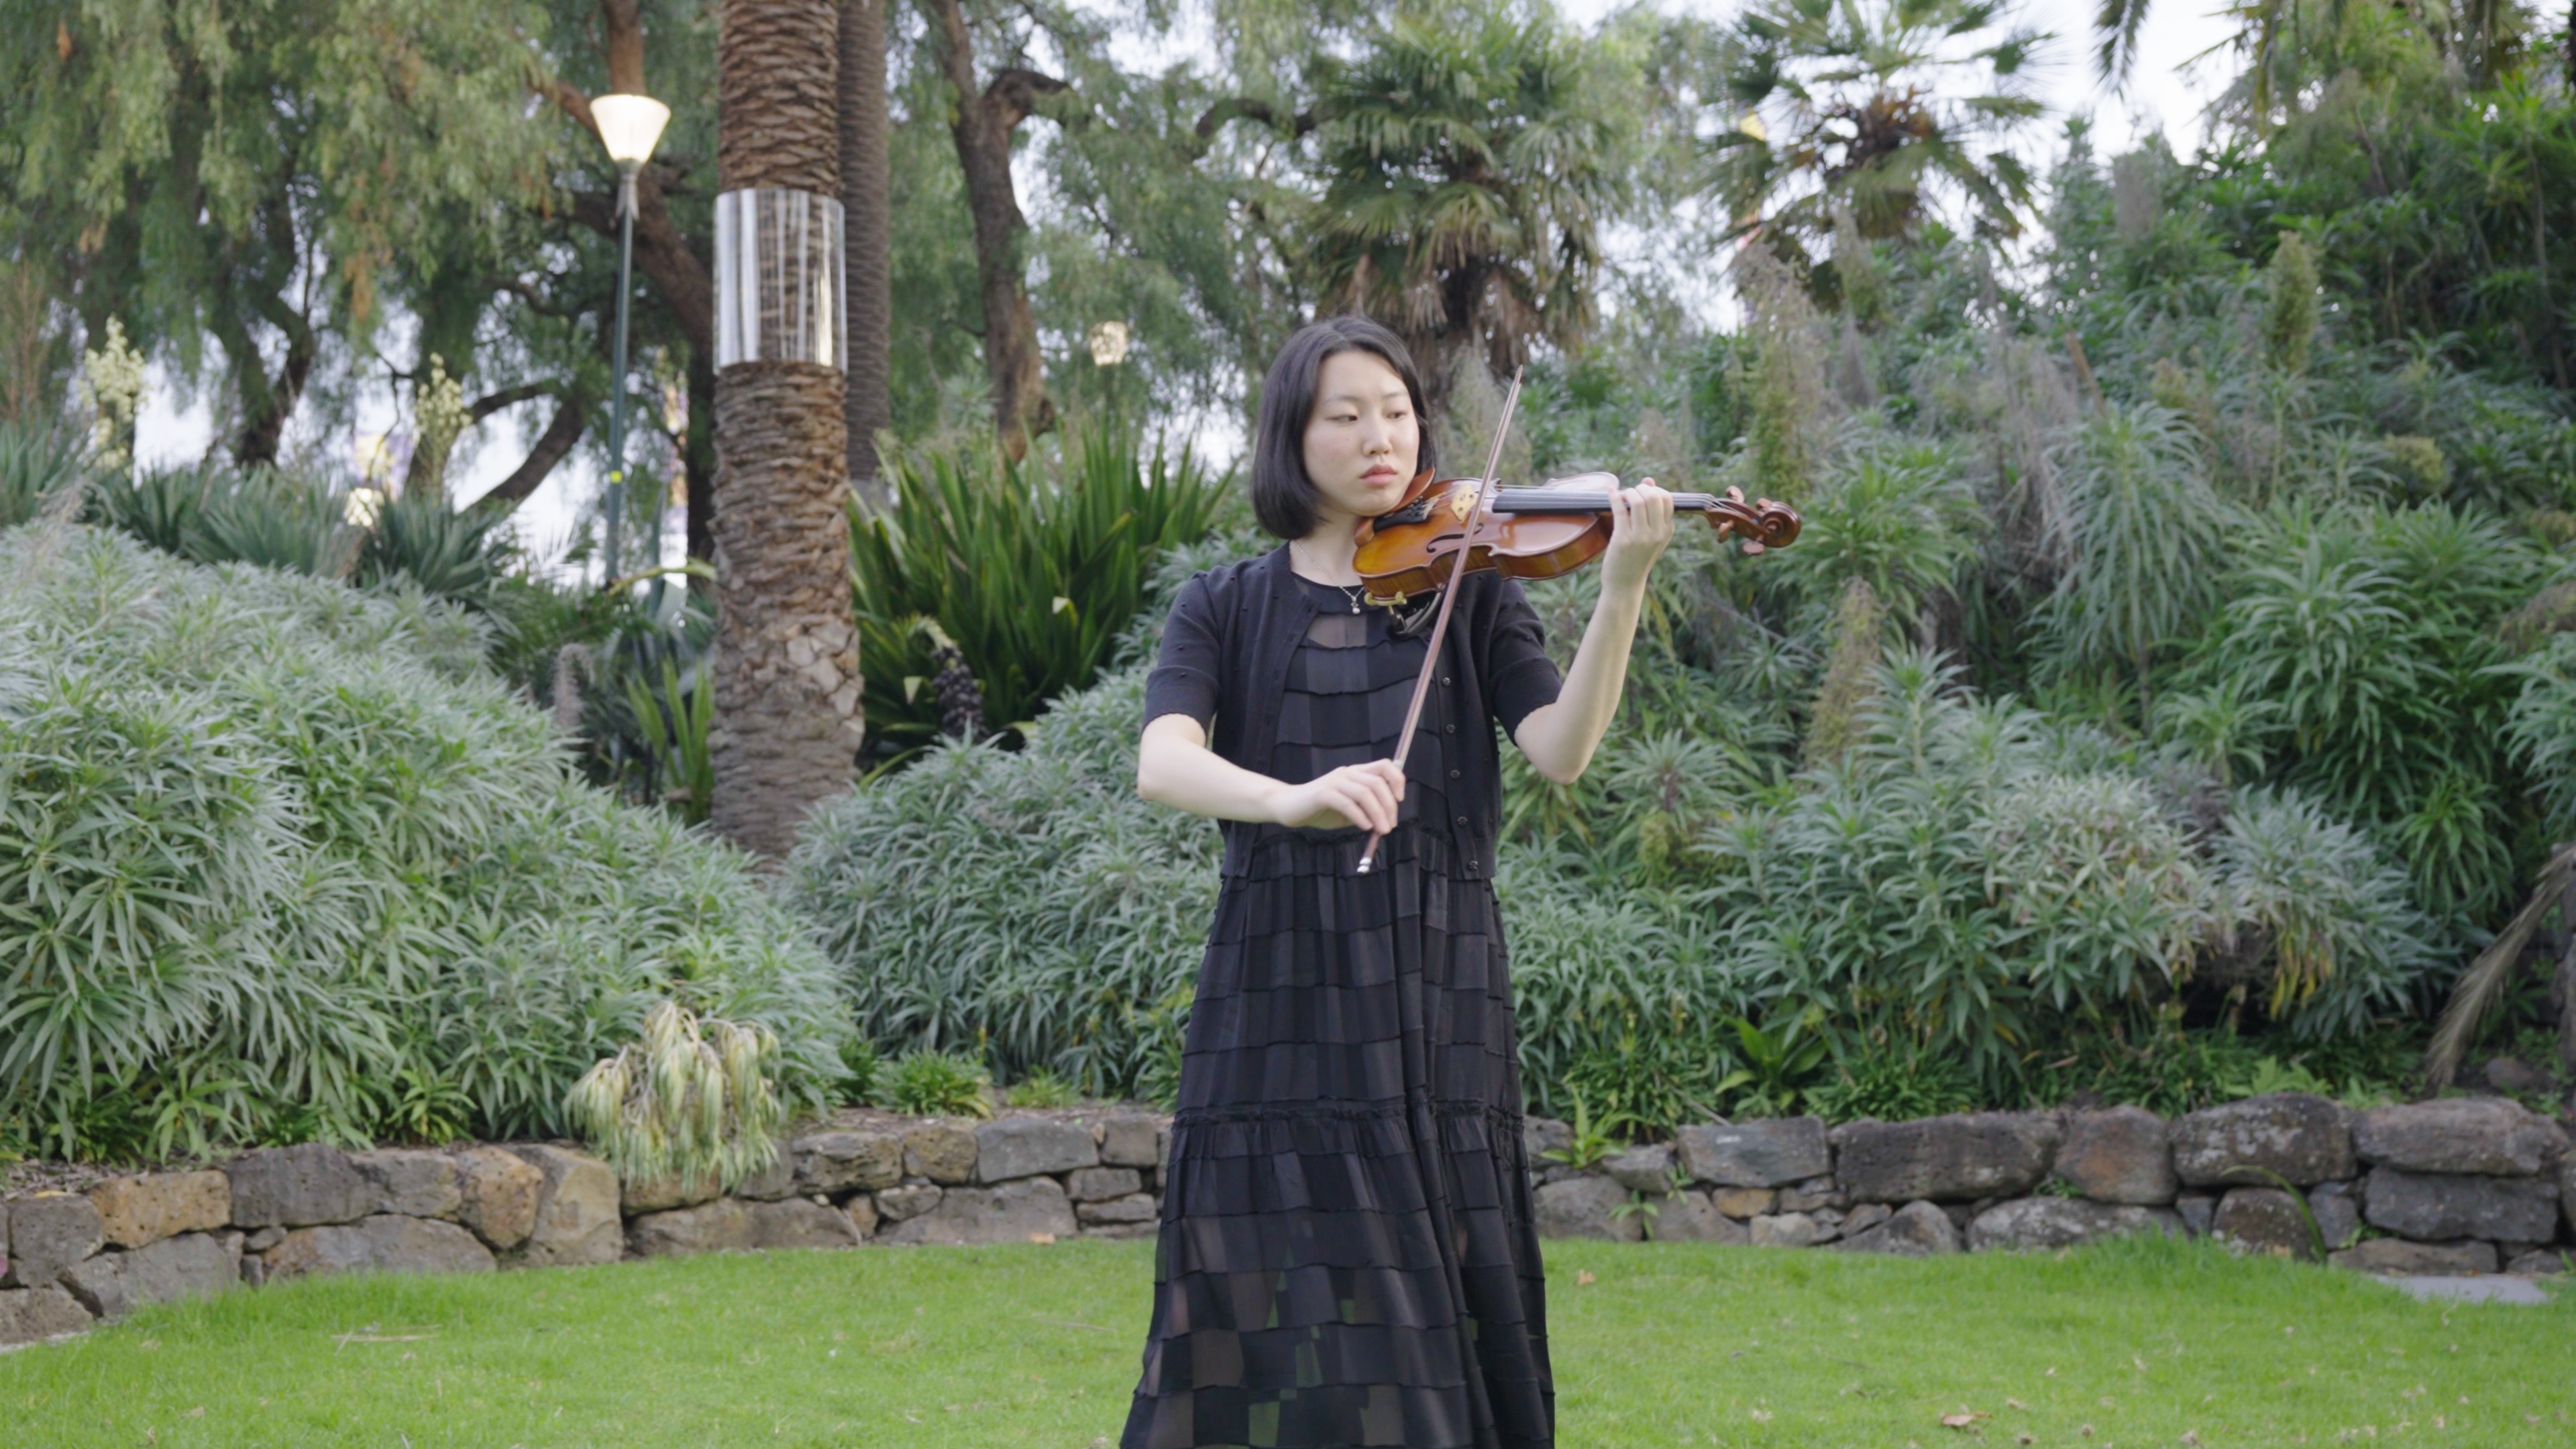 A woman playing a violin in a garden.